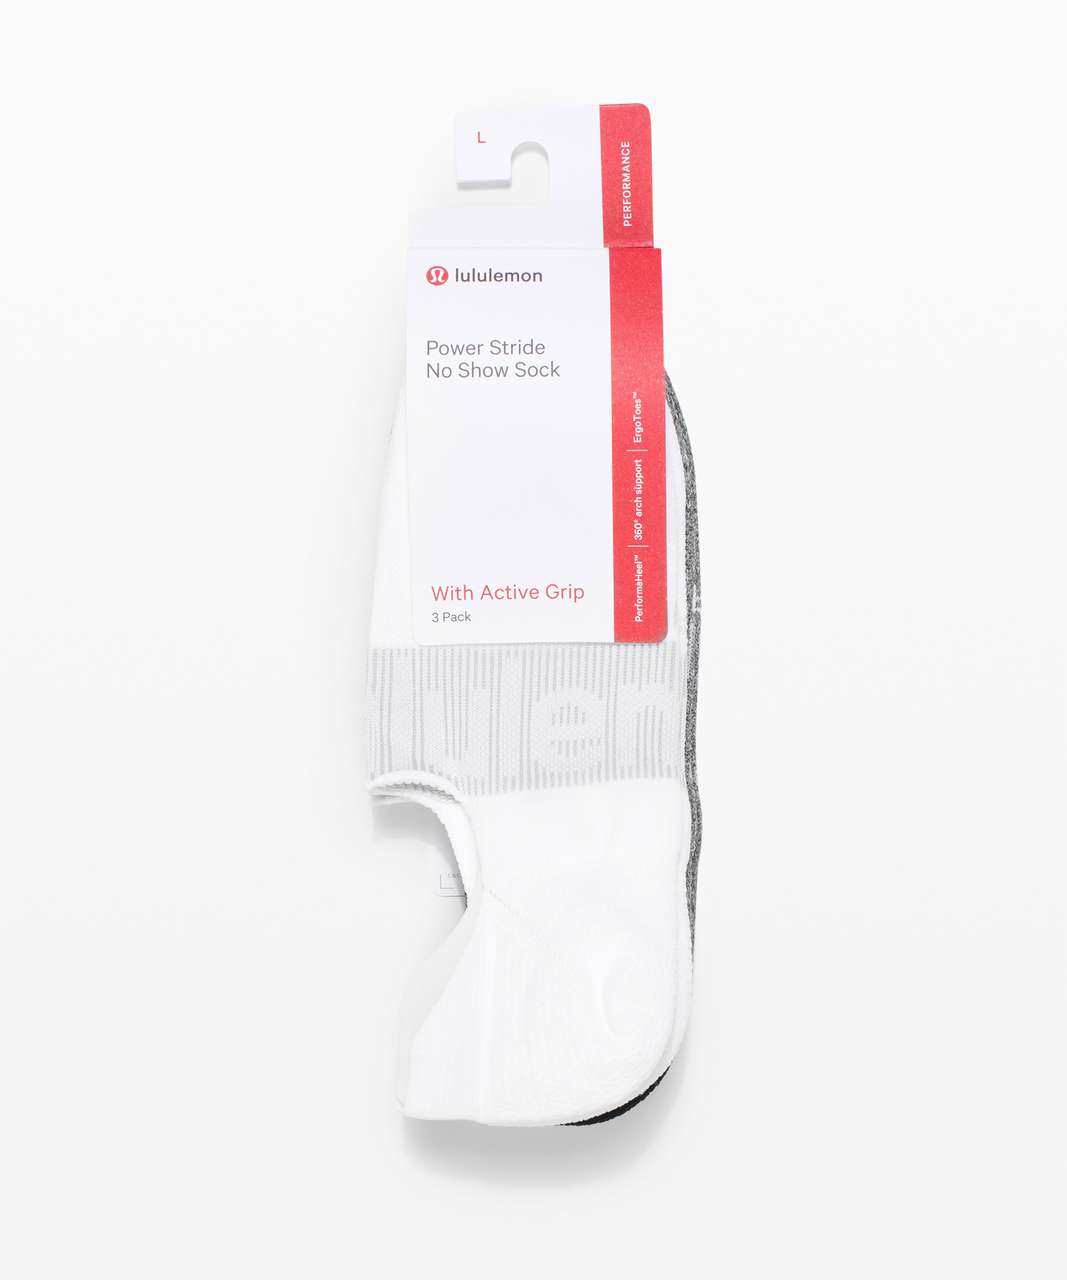 Lululemon Power Stride No-Show Sock with Active Grip *3 Pack - White / Heather Grey / Black